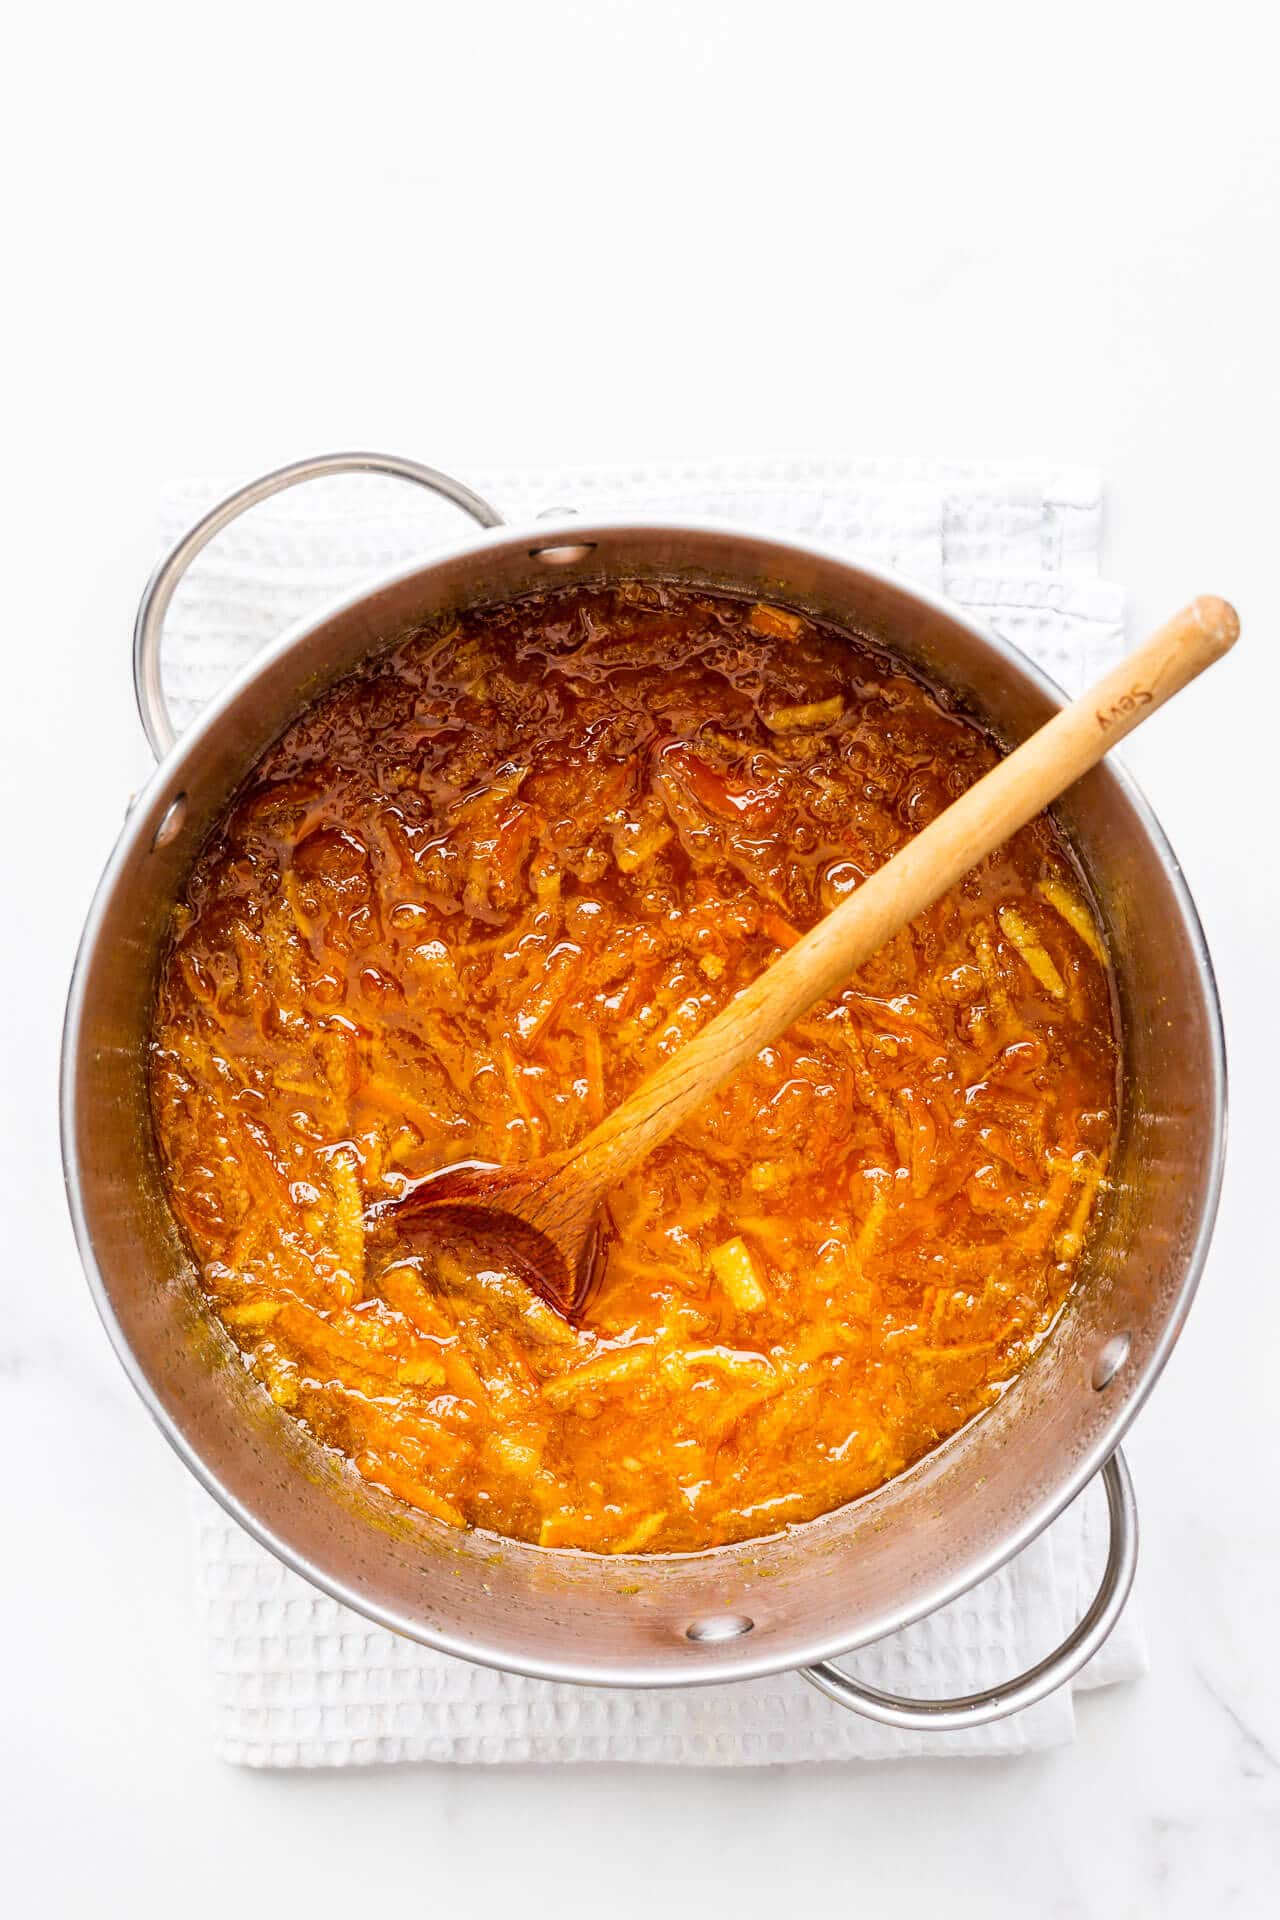 A pot of boiled homemade orange marmalade ready to be canned in jars.